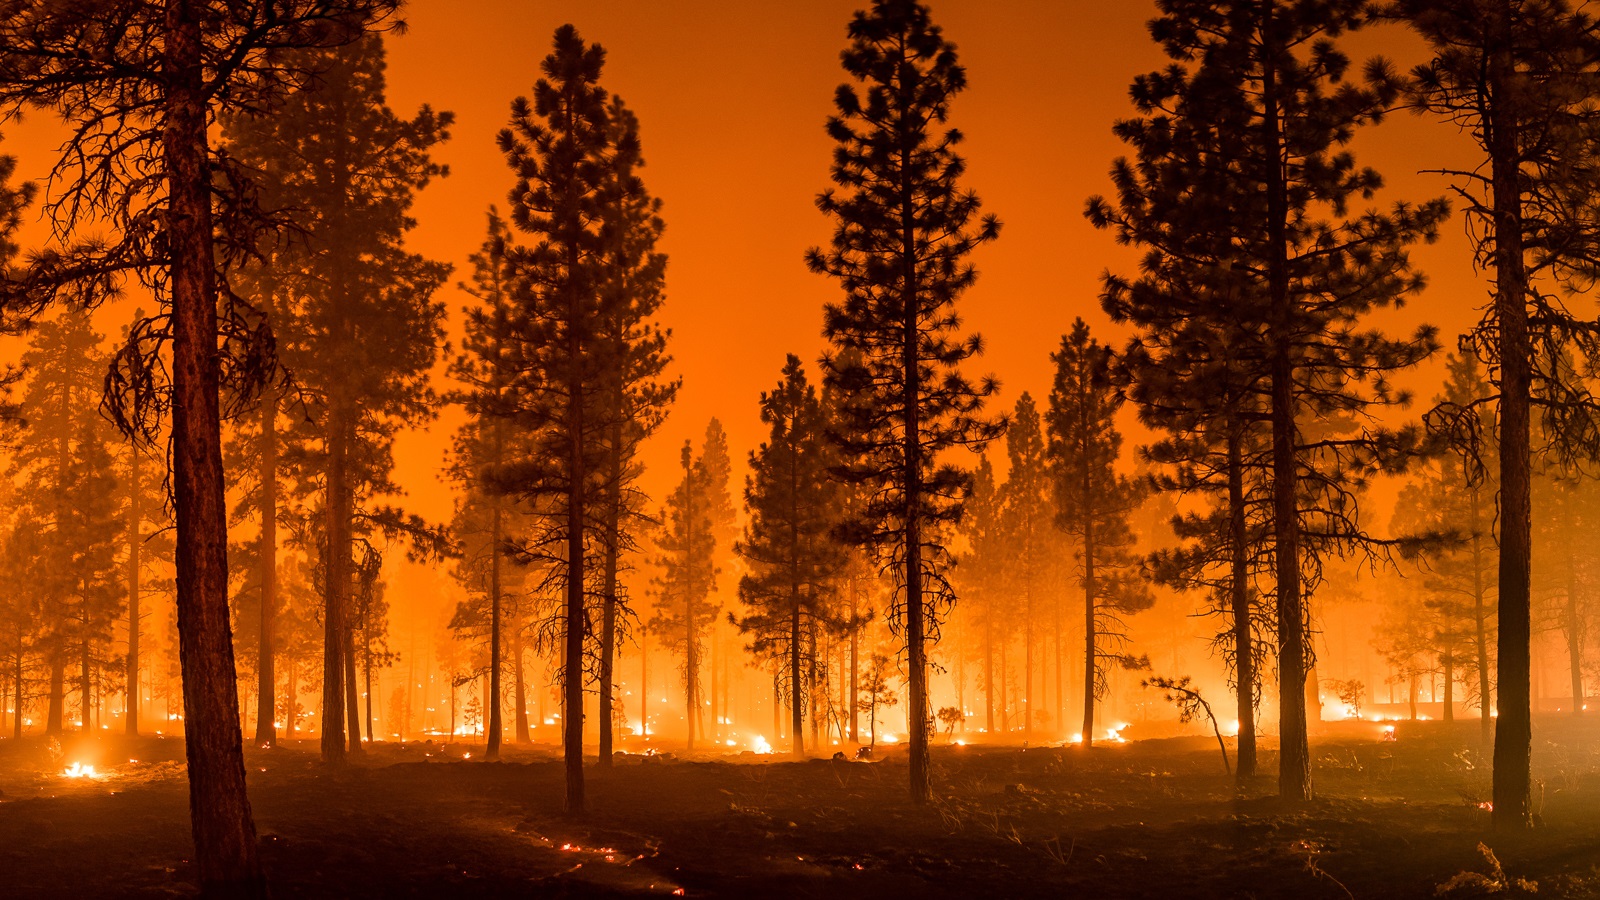 Wildfires burn across the West, affecting California, Oregon and Washington. (Shutterstock / My Photo Buddy.)